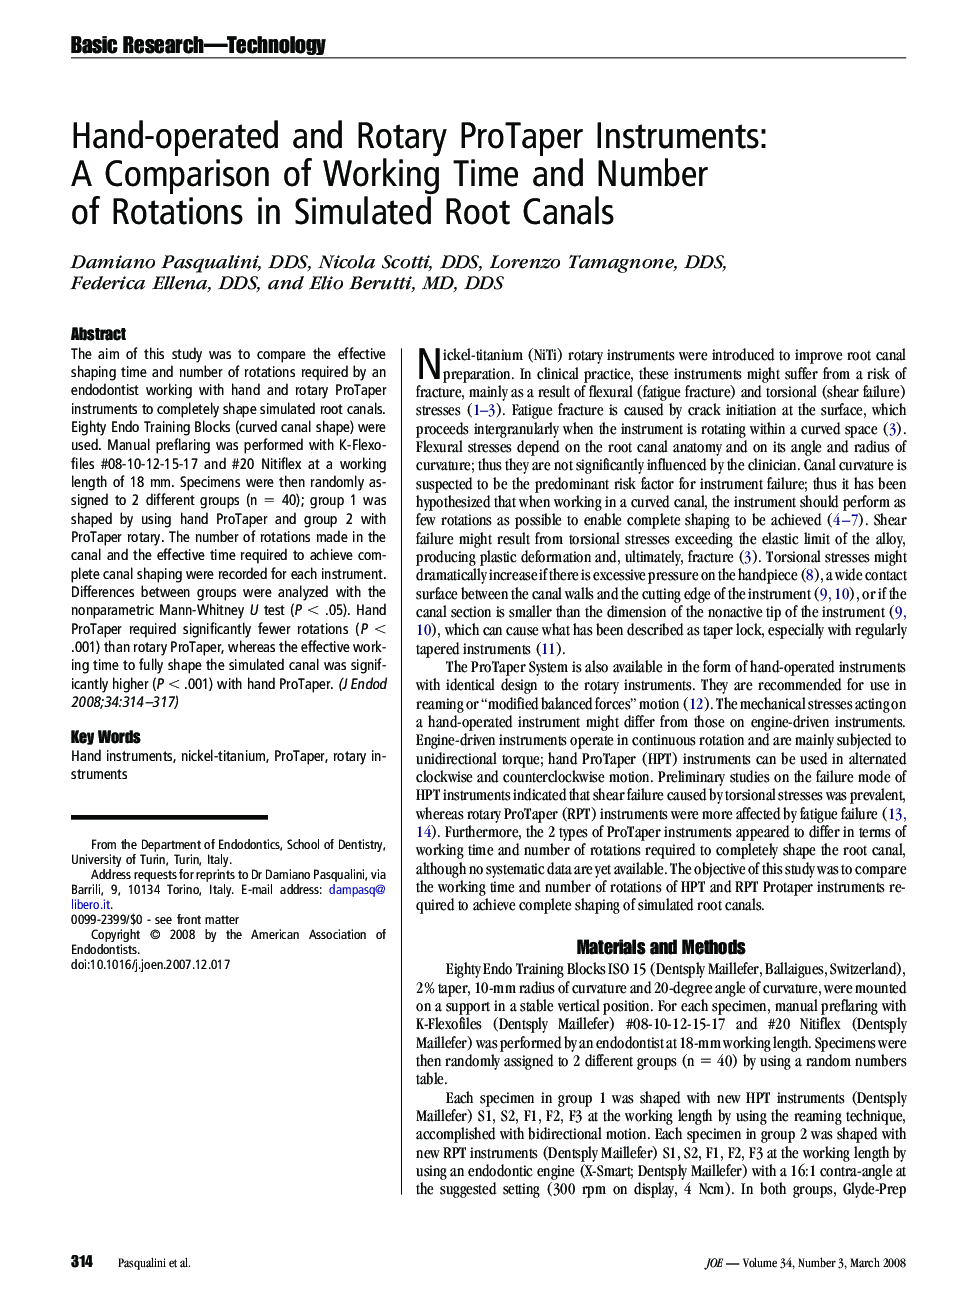 Hand-operated and Rotary ProTaper Instruments: A Comparison of Working Time and Number of Rotations in Simulated Root Canals